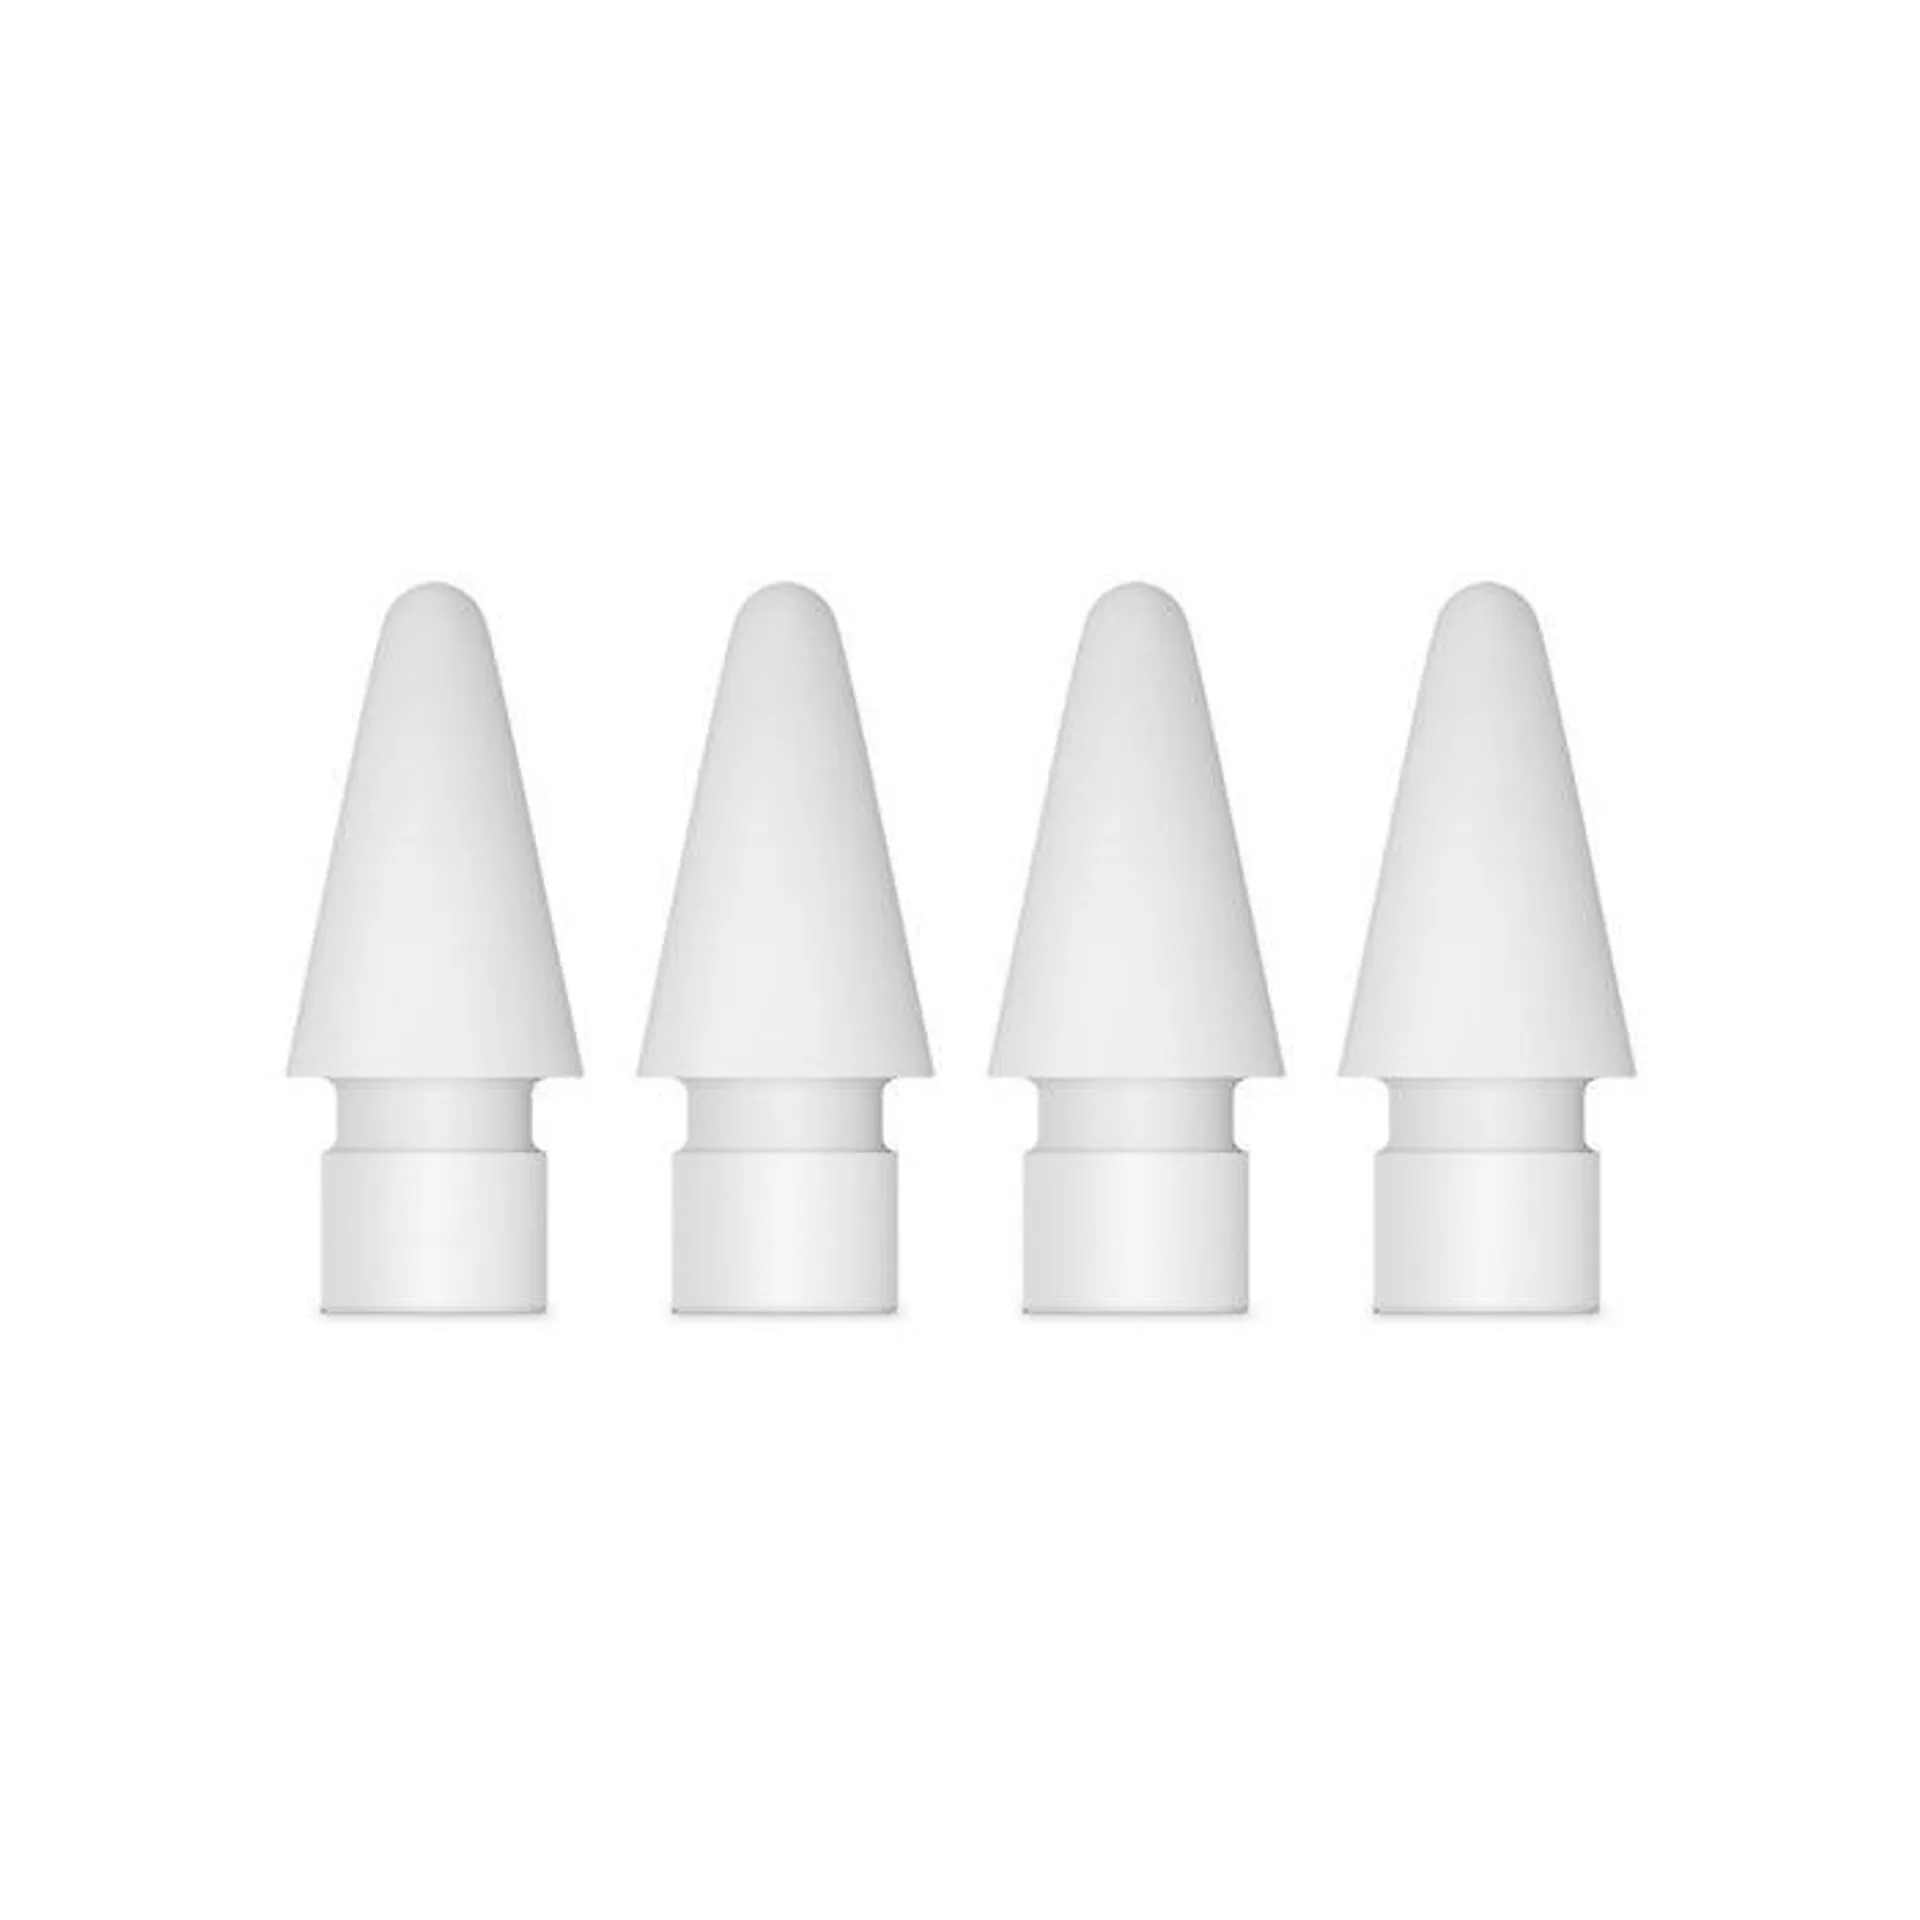 Apple Pencil Replacement Tips - 4 Pack